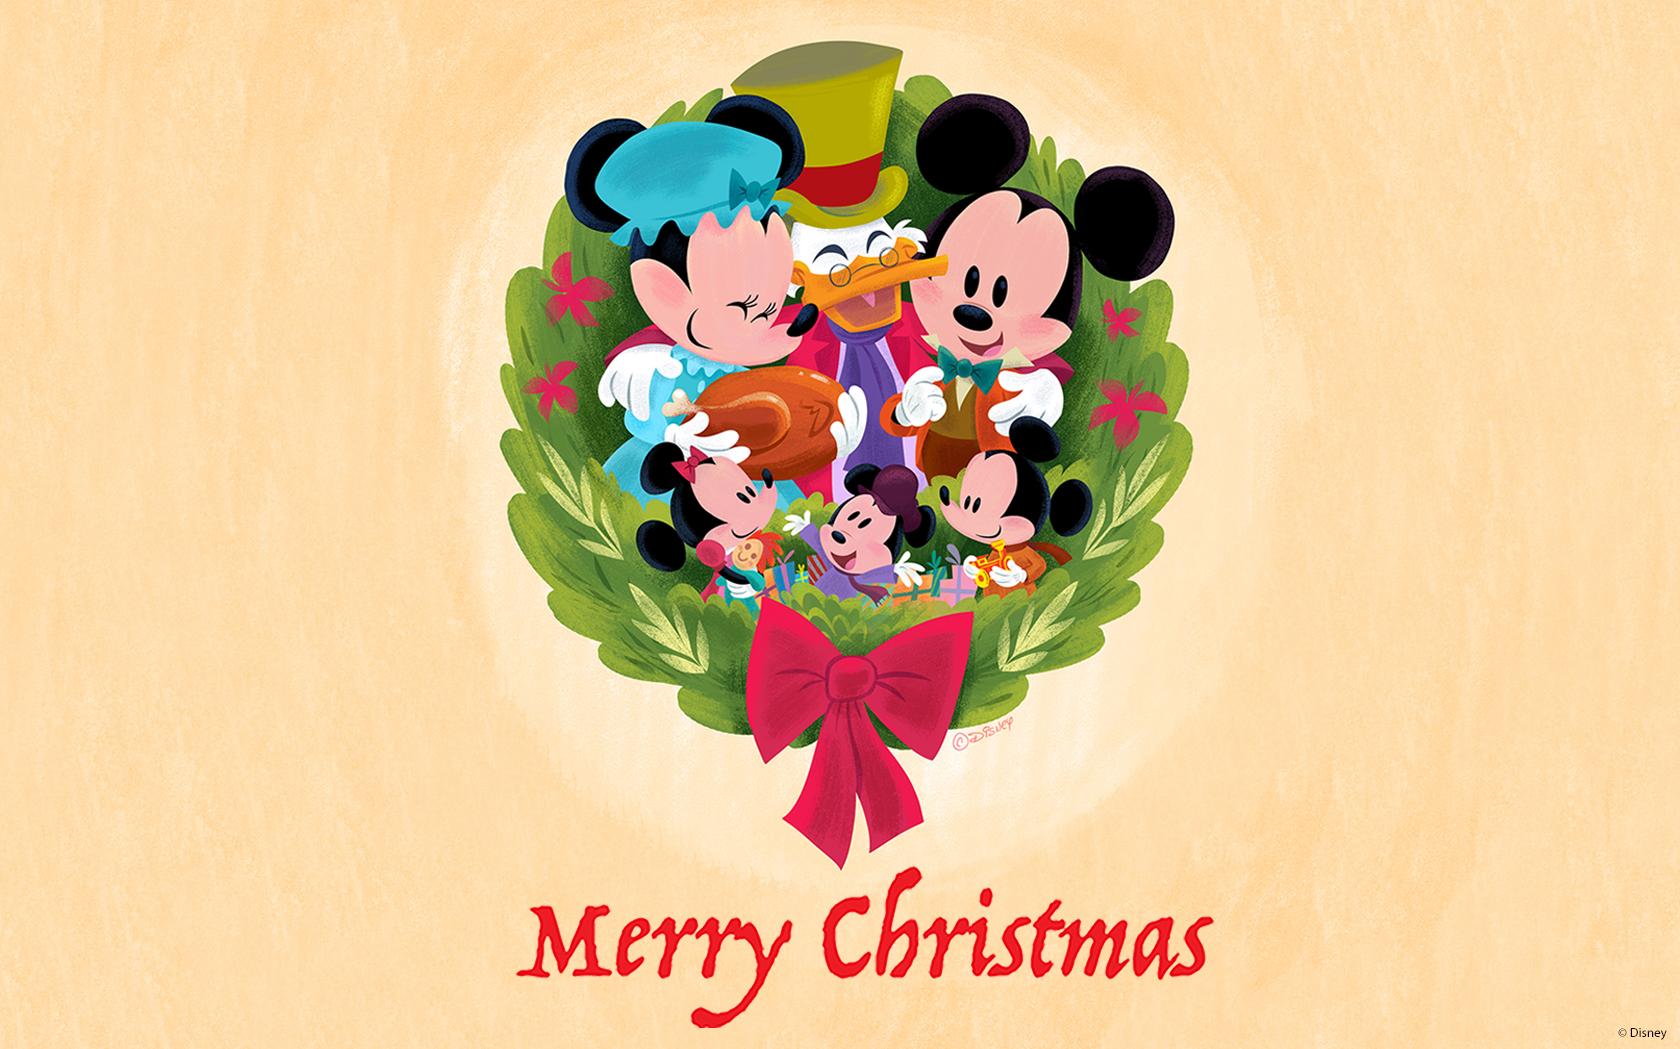 These Special Holiday Wallpaper Designed By Disney